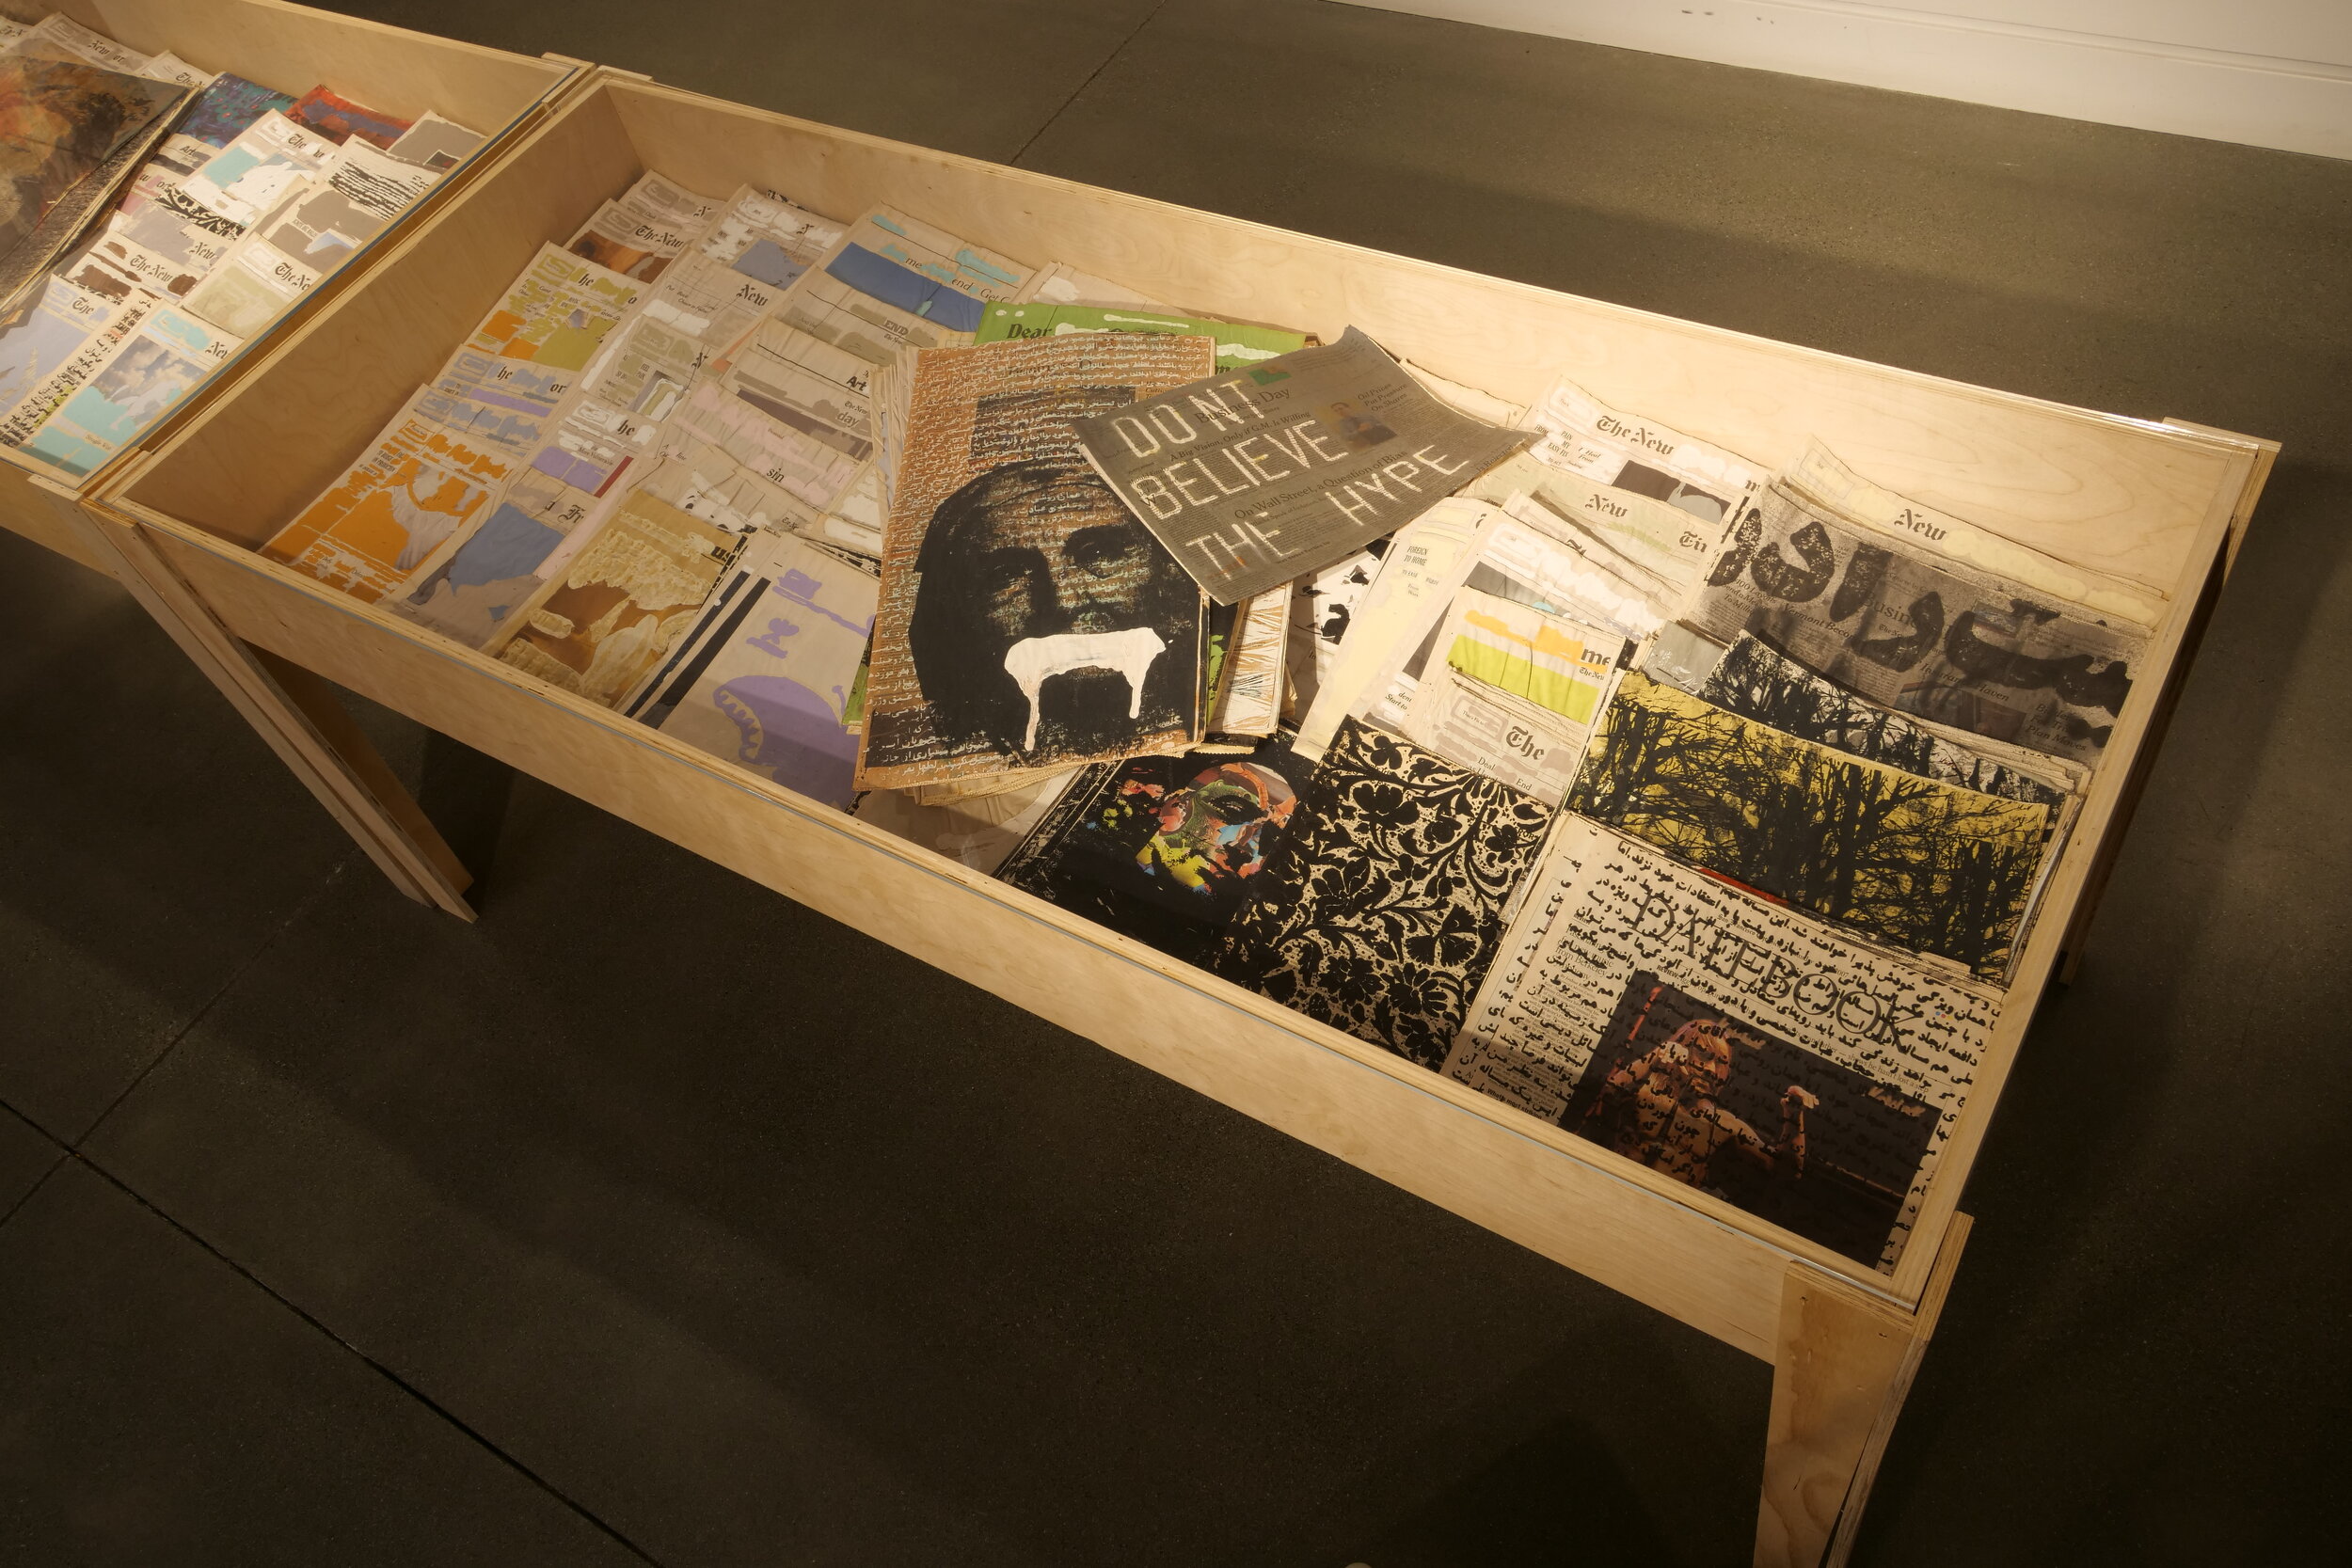 Display table featuring redacted magazines and media.